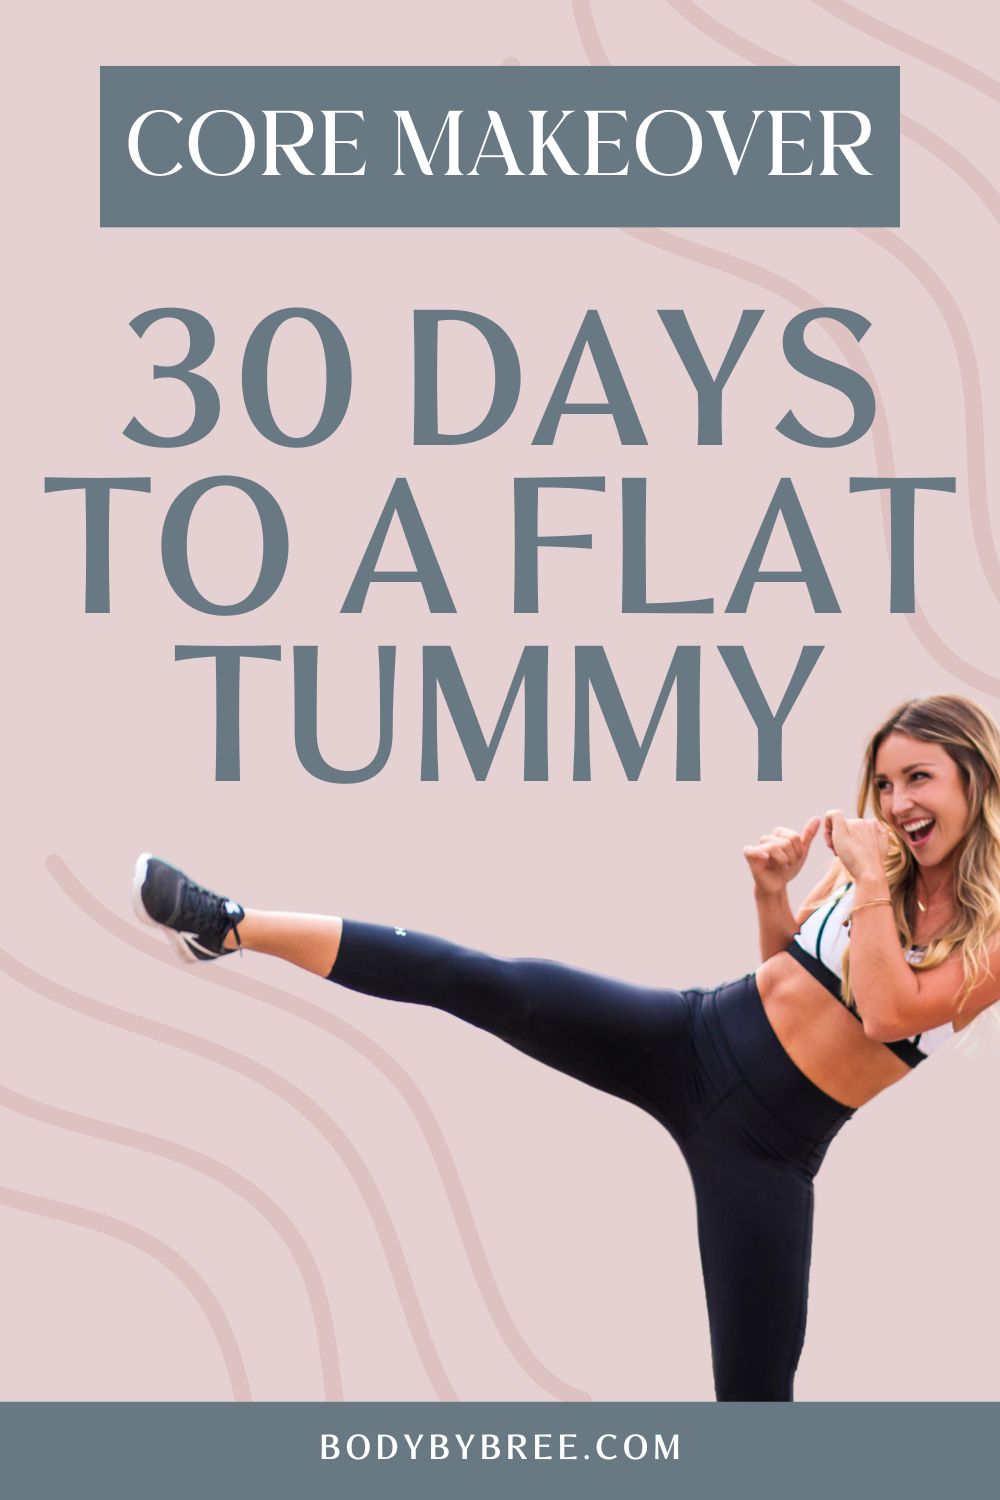 CORE MAKEOVER: 30 DAYS TO A FLAT TUMMY